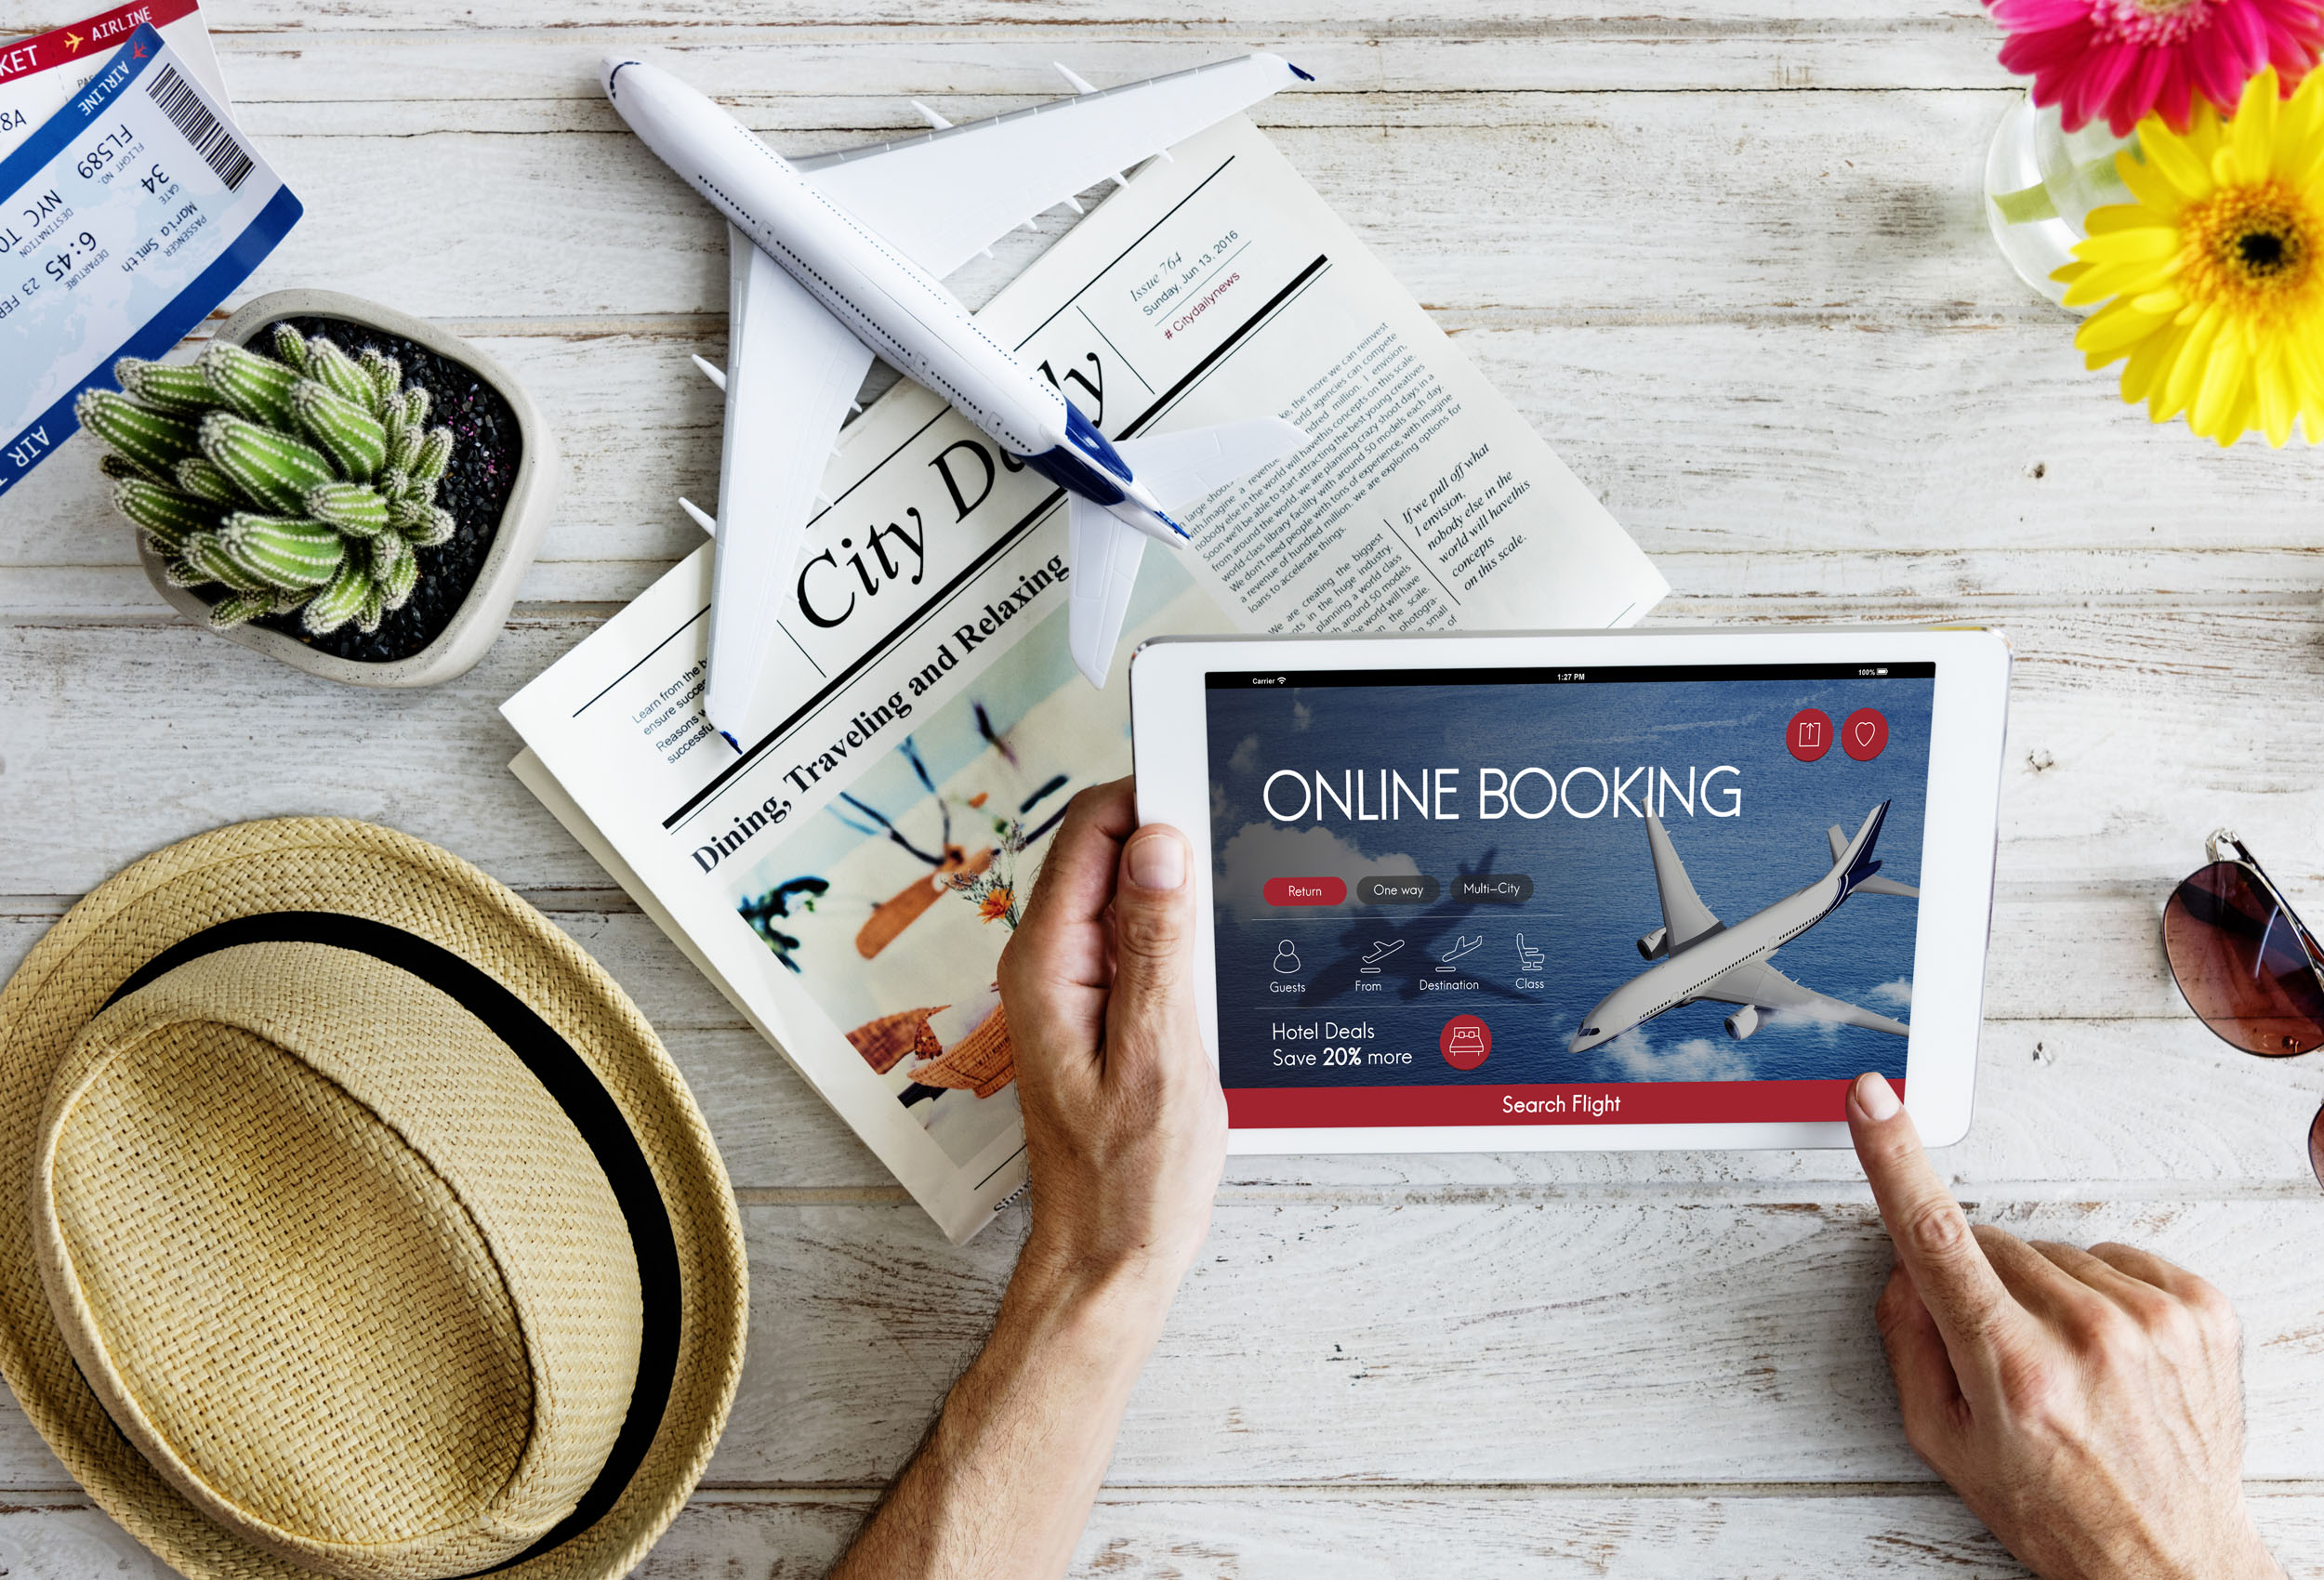 5 Reasons You Should Use Online Travel Reservation Systems